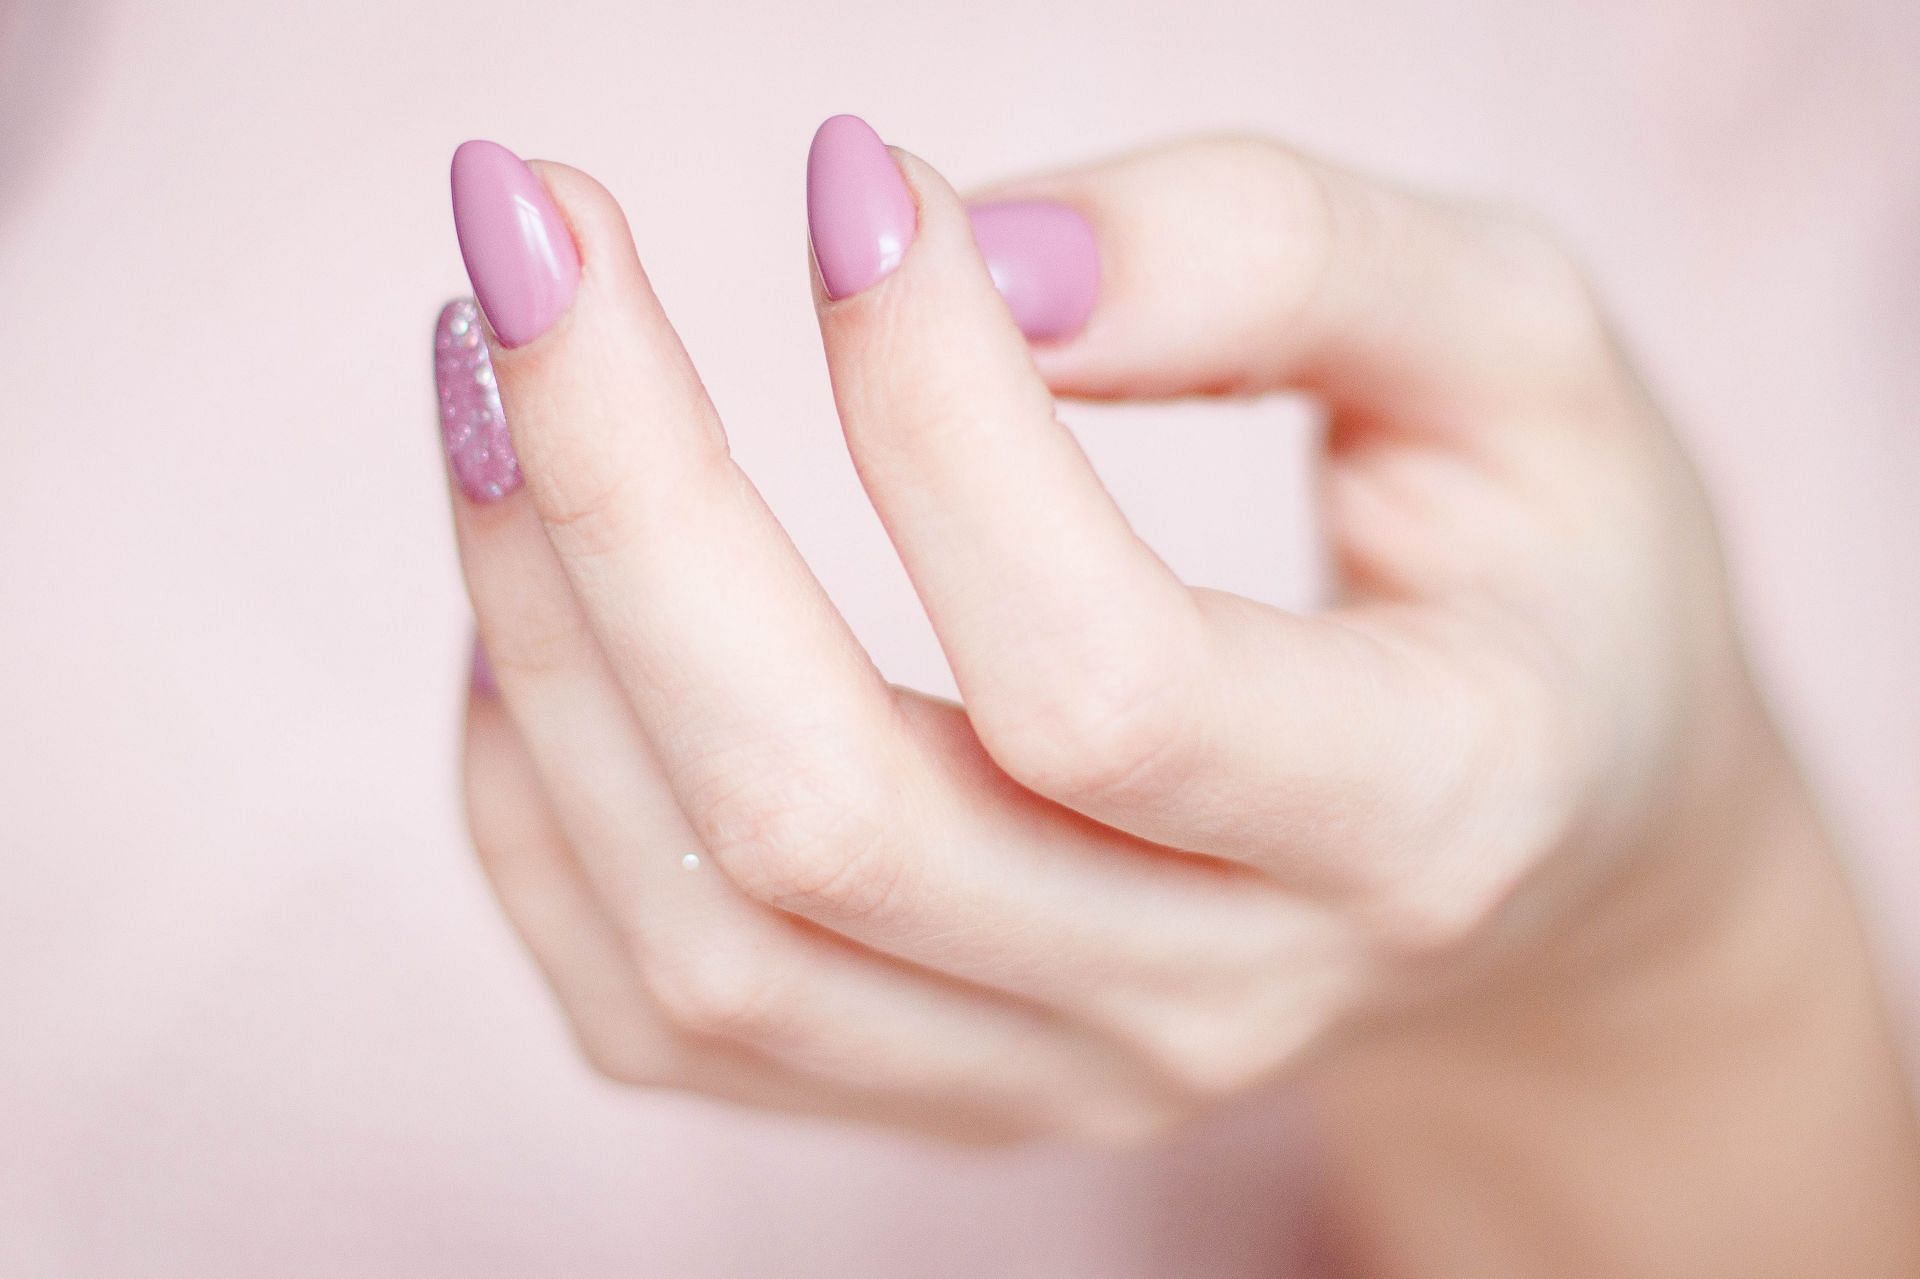 B7 helps strengthen nails and reduce brittleness (Image via Pexels)